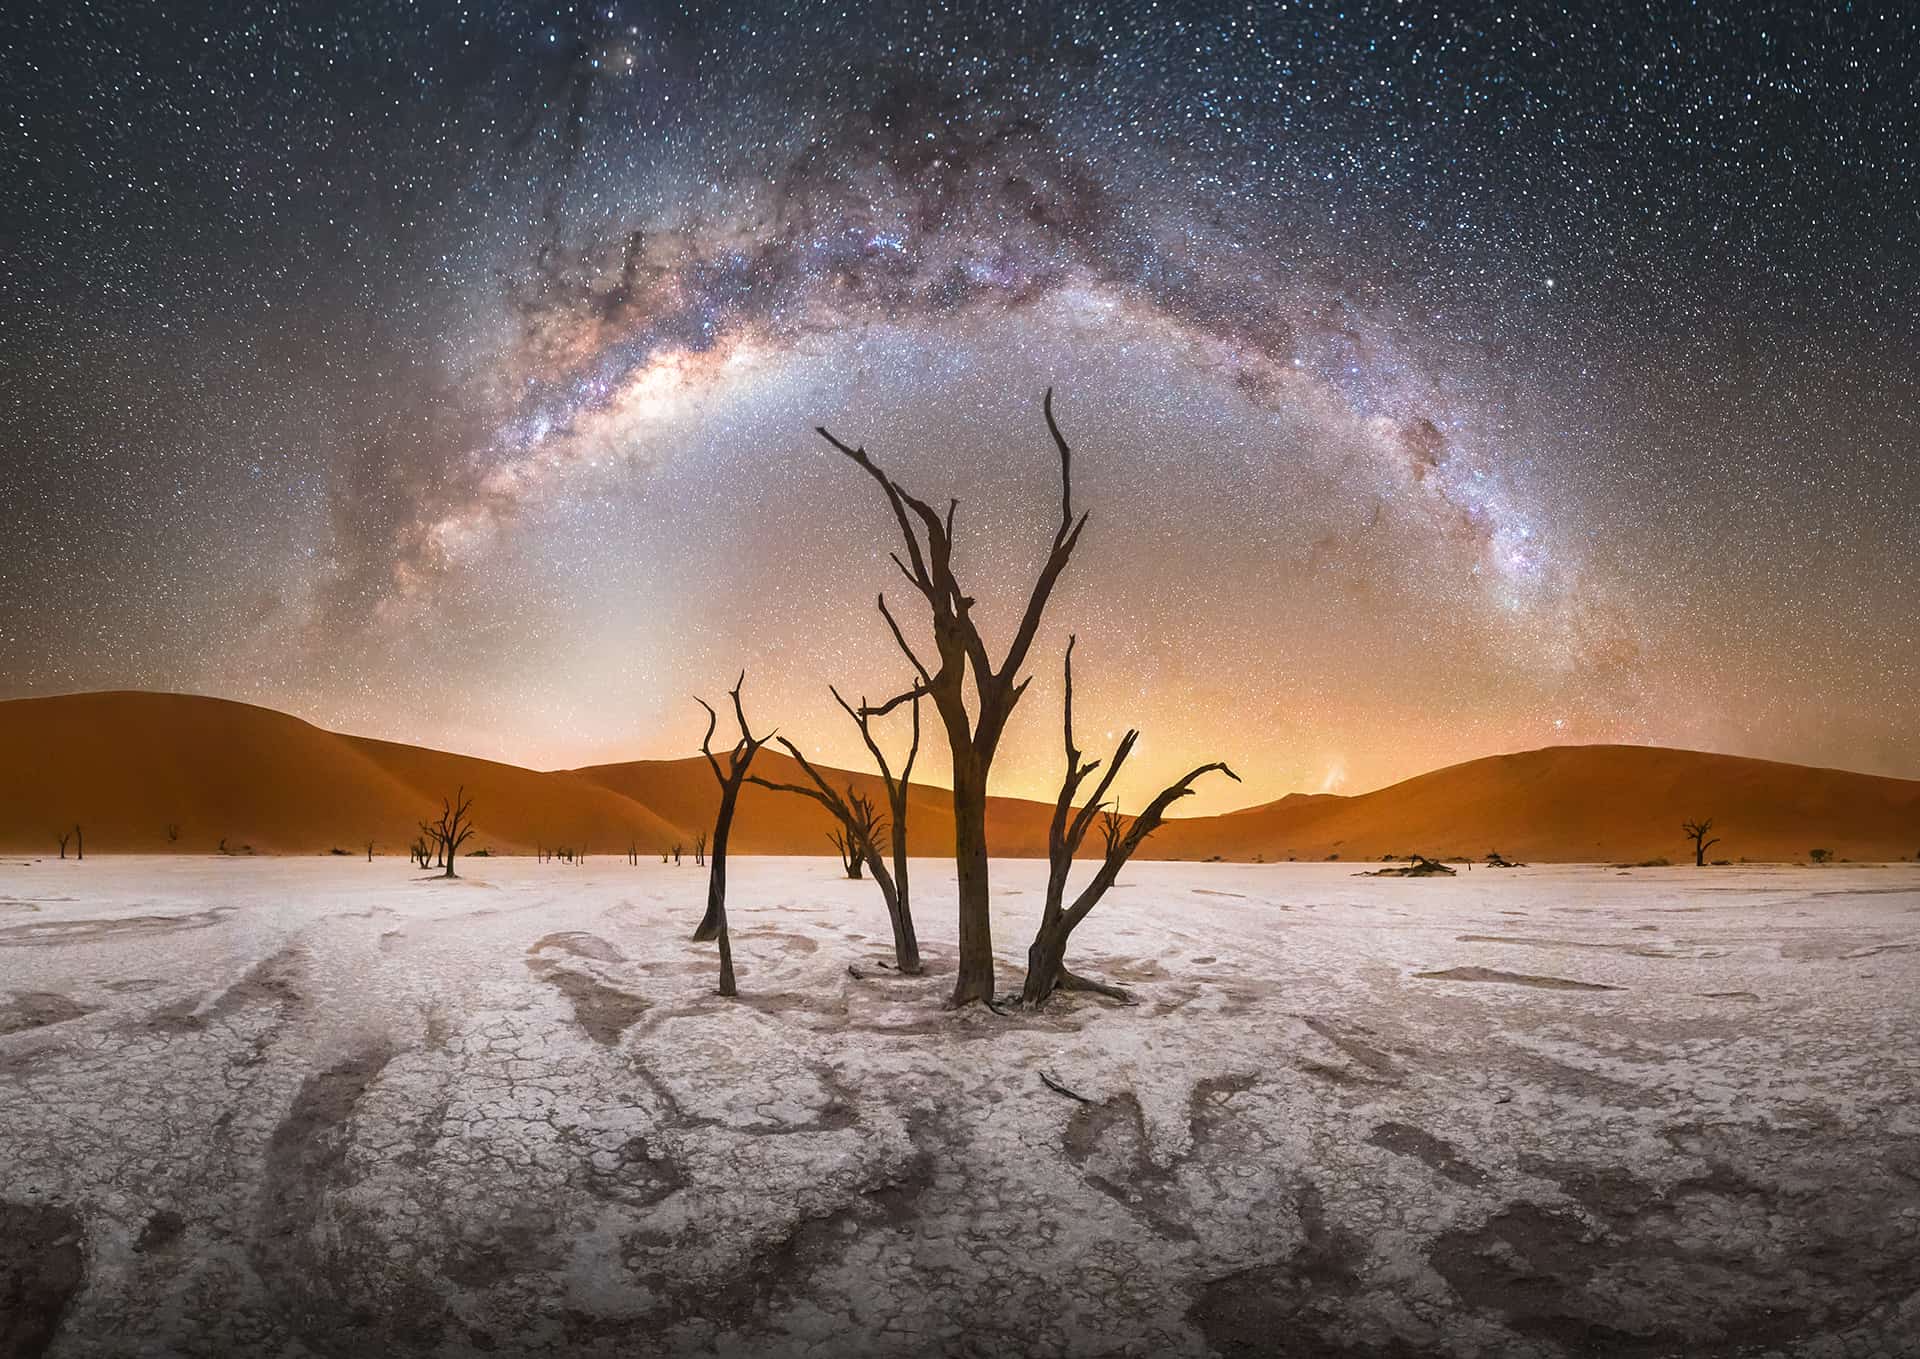 Best places to see the Milky Way in Africa